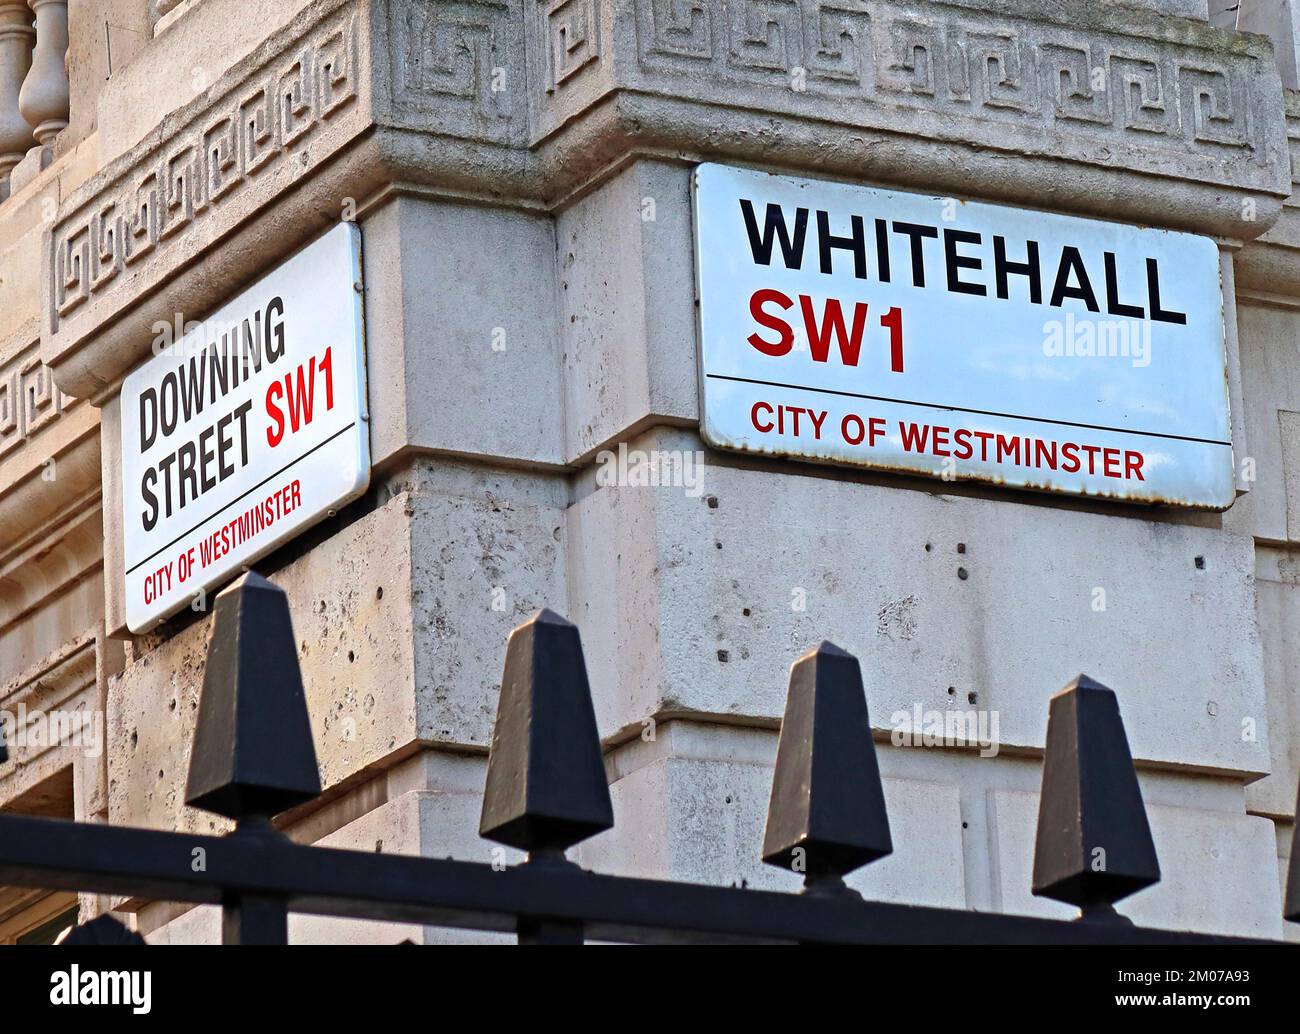 Whitehall & Downing Street SW1 sign, Central London, England, UK, SW1 Stock Photo